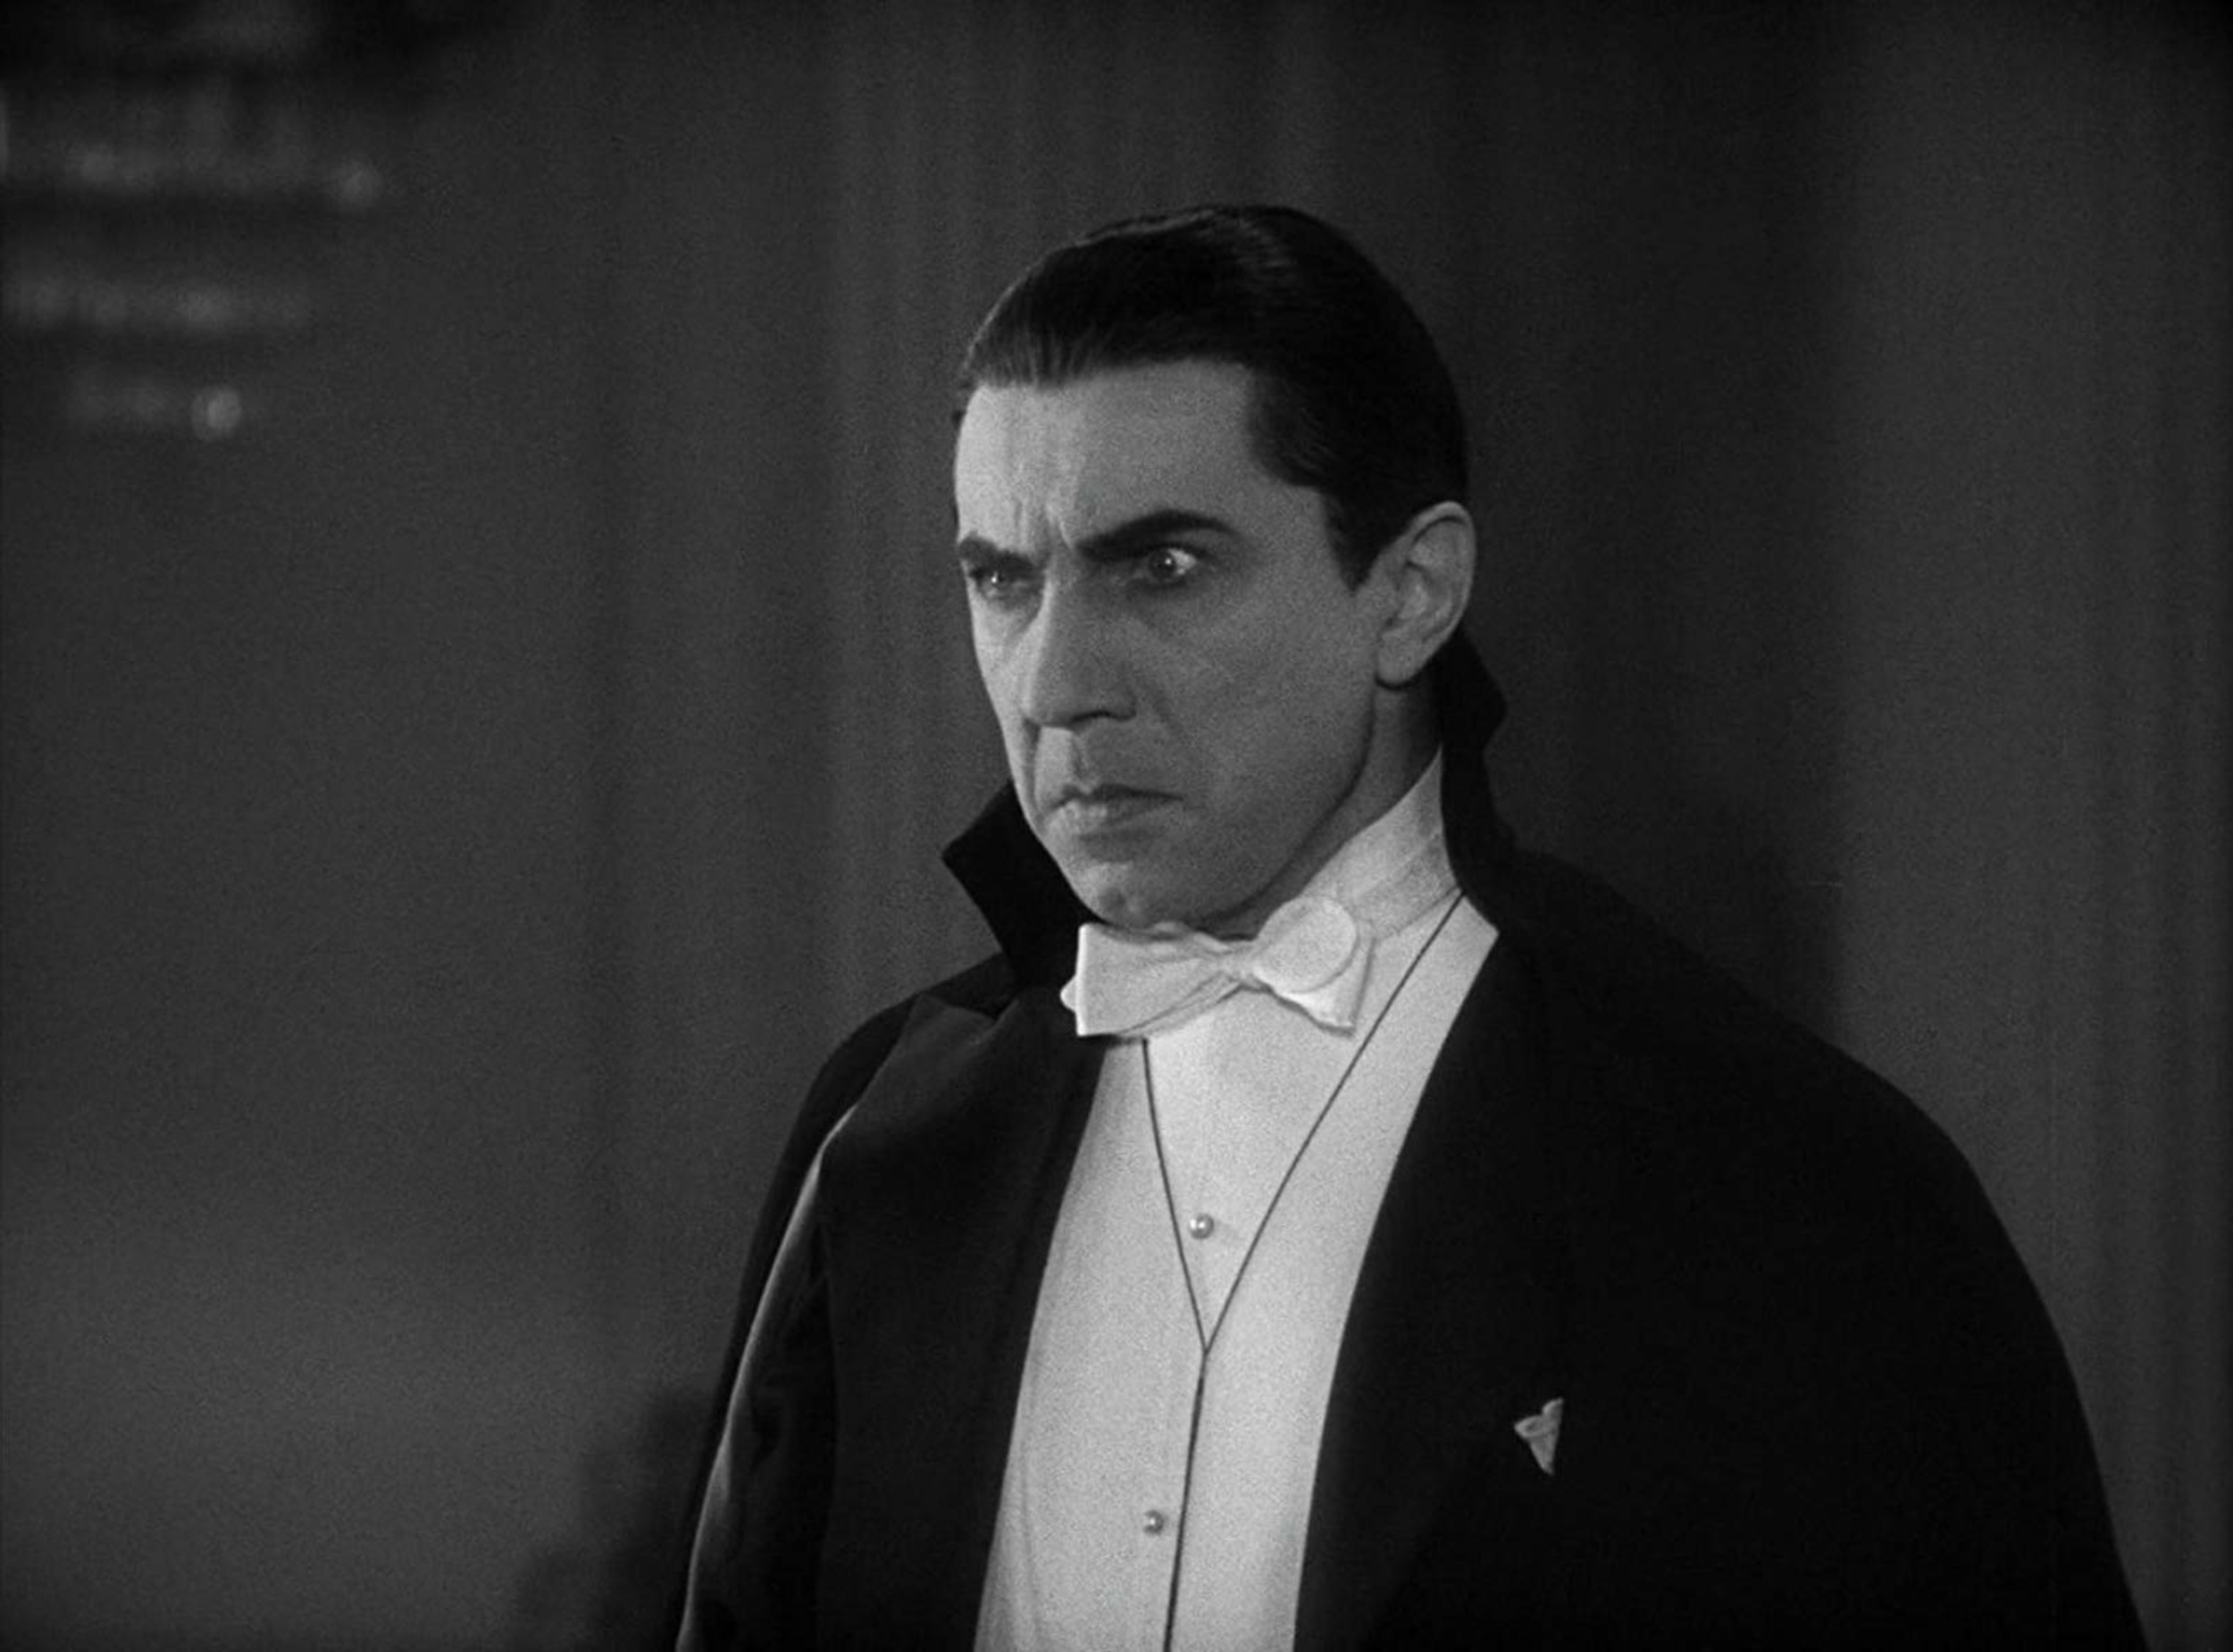 <p>If you think it might be difficult to take Bela Lugosi’s take on the iconic bloodsucker seriously after Martin Landau’s Oscar-winning performance of a late-in-life Lugosi in Tim Burton’s “Ed Wood," you needn’t worry. Tod Browning’s 1931 “Dracula” is still a creepy delight — and while Karl Freund’s shadowy cinematography certainly lends an apprehensive air to the film, the menace is all Lugosi. Gloria Holden capably took up the fangs as “Dracula’s Daughter," while Lon Chaney Jr. starred as the “Son of Dracula," which concluded the initial trilogy. Lugosi returned one last time to the role for the sublime “Abbott and Costello Meet Frankenstein."</p><p>You may also like: <a href='https://www.yardbarker.com/entertainment/articles/the_craziest_things_musicians_have_done_on_stage_010224/s1__38527145'>The craziest things musicians have done on stage</a></p>